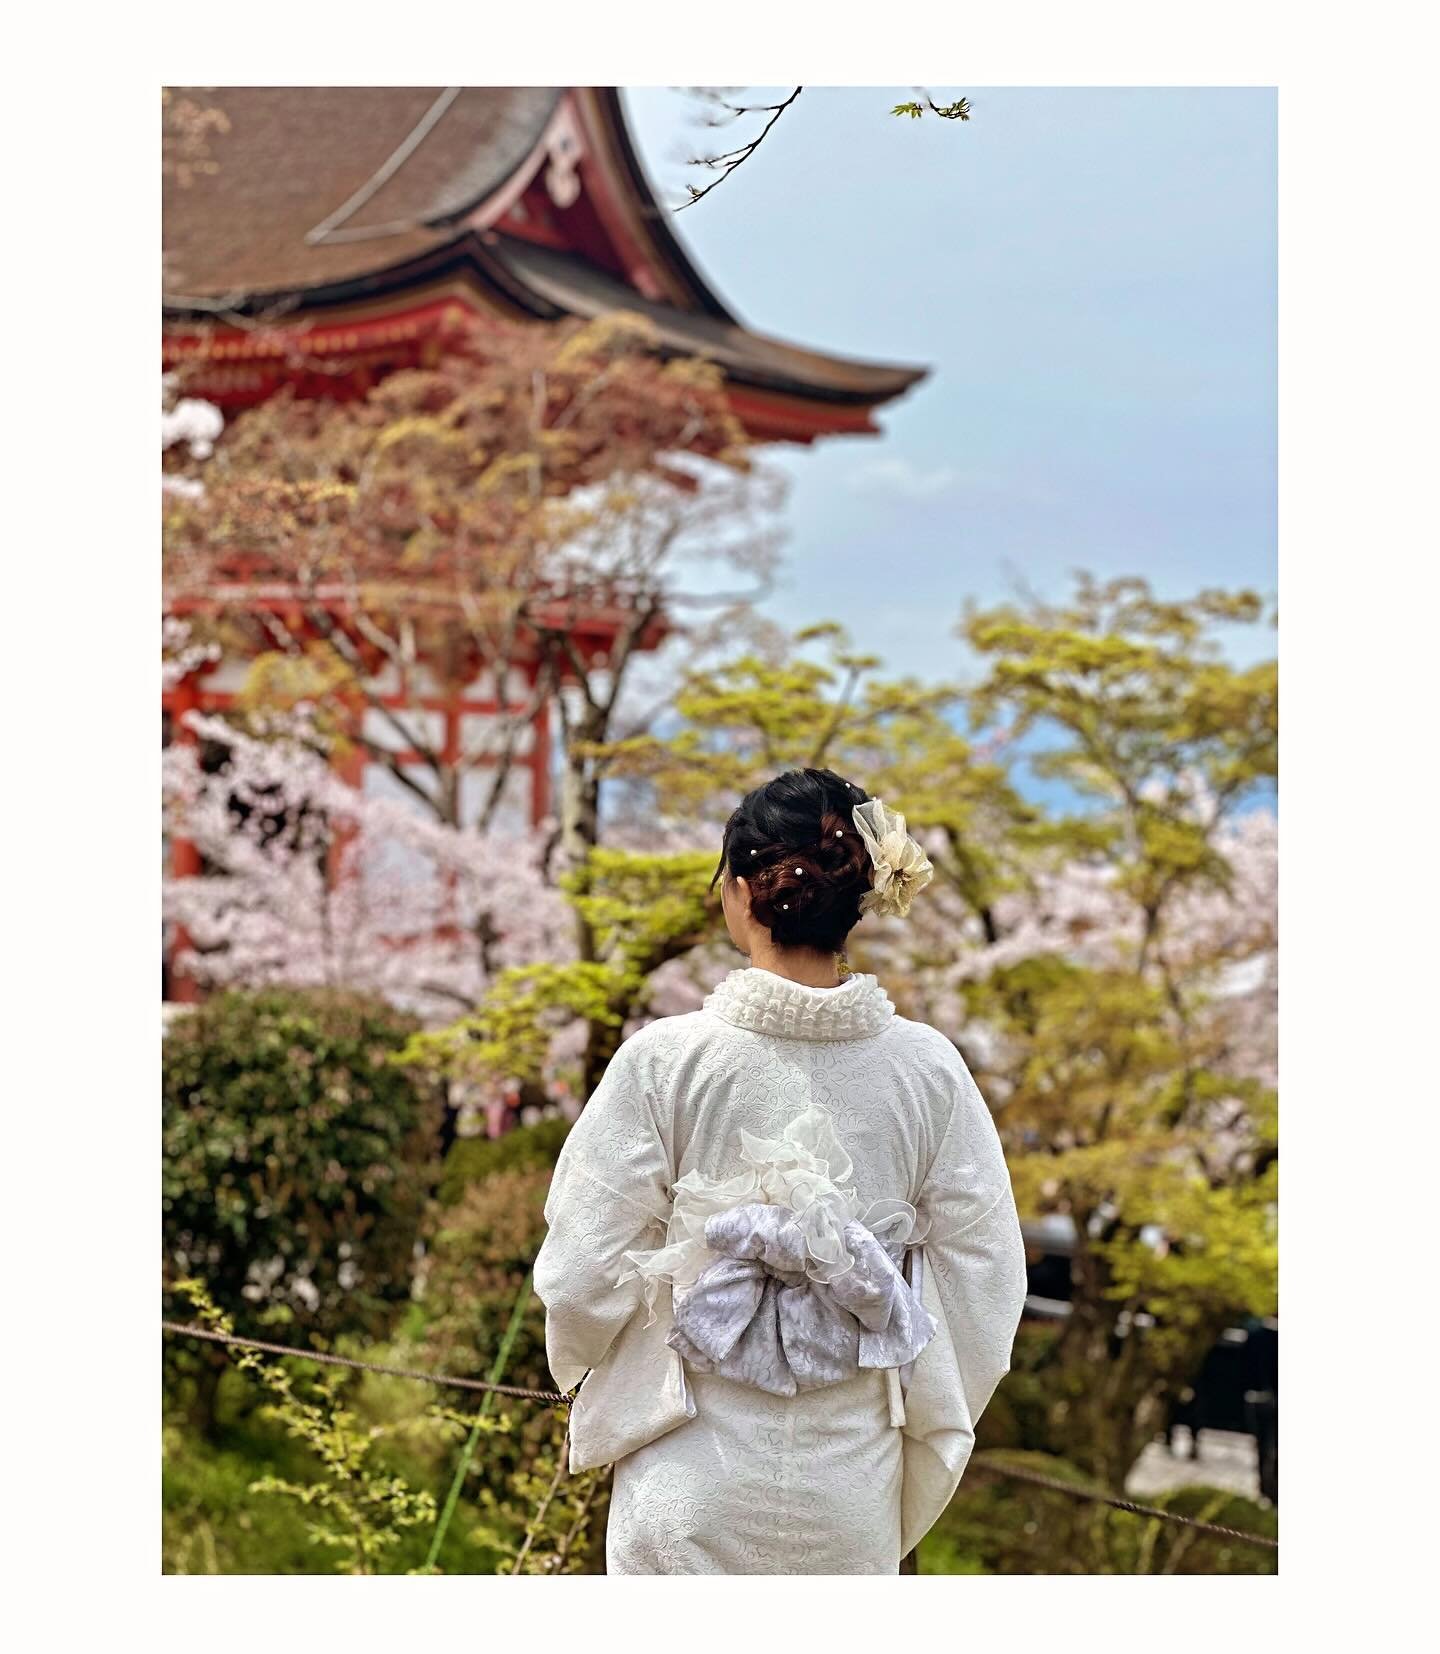 Just returned from a fab trip to Japan with family during cherry blossom season. Women rent kimonos and stroll while getting their photos taken...a delight to see!